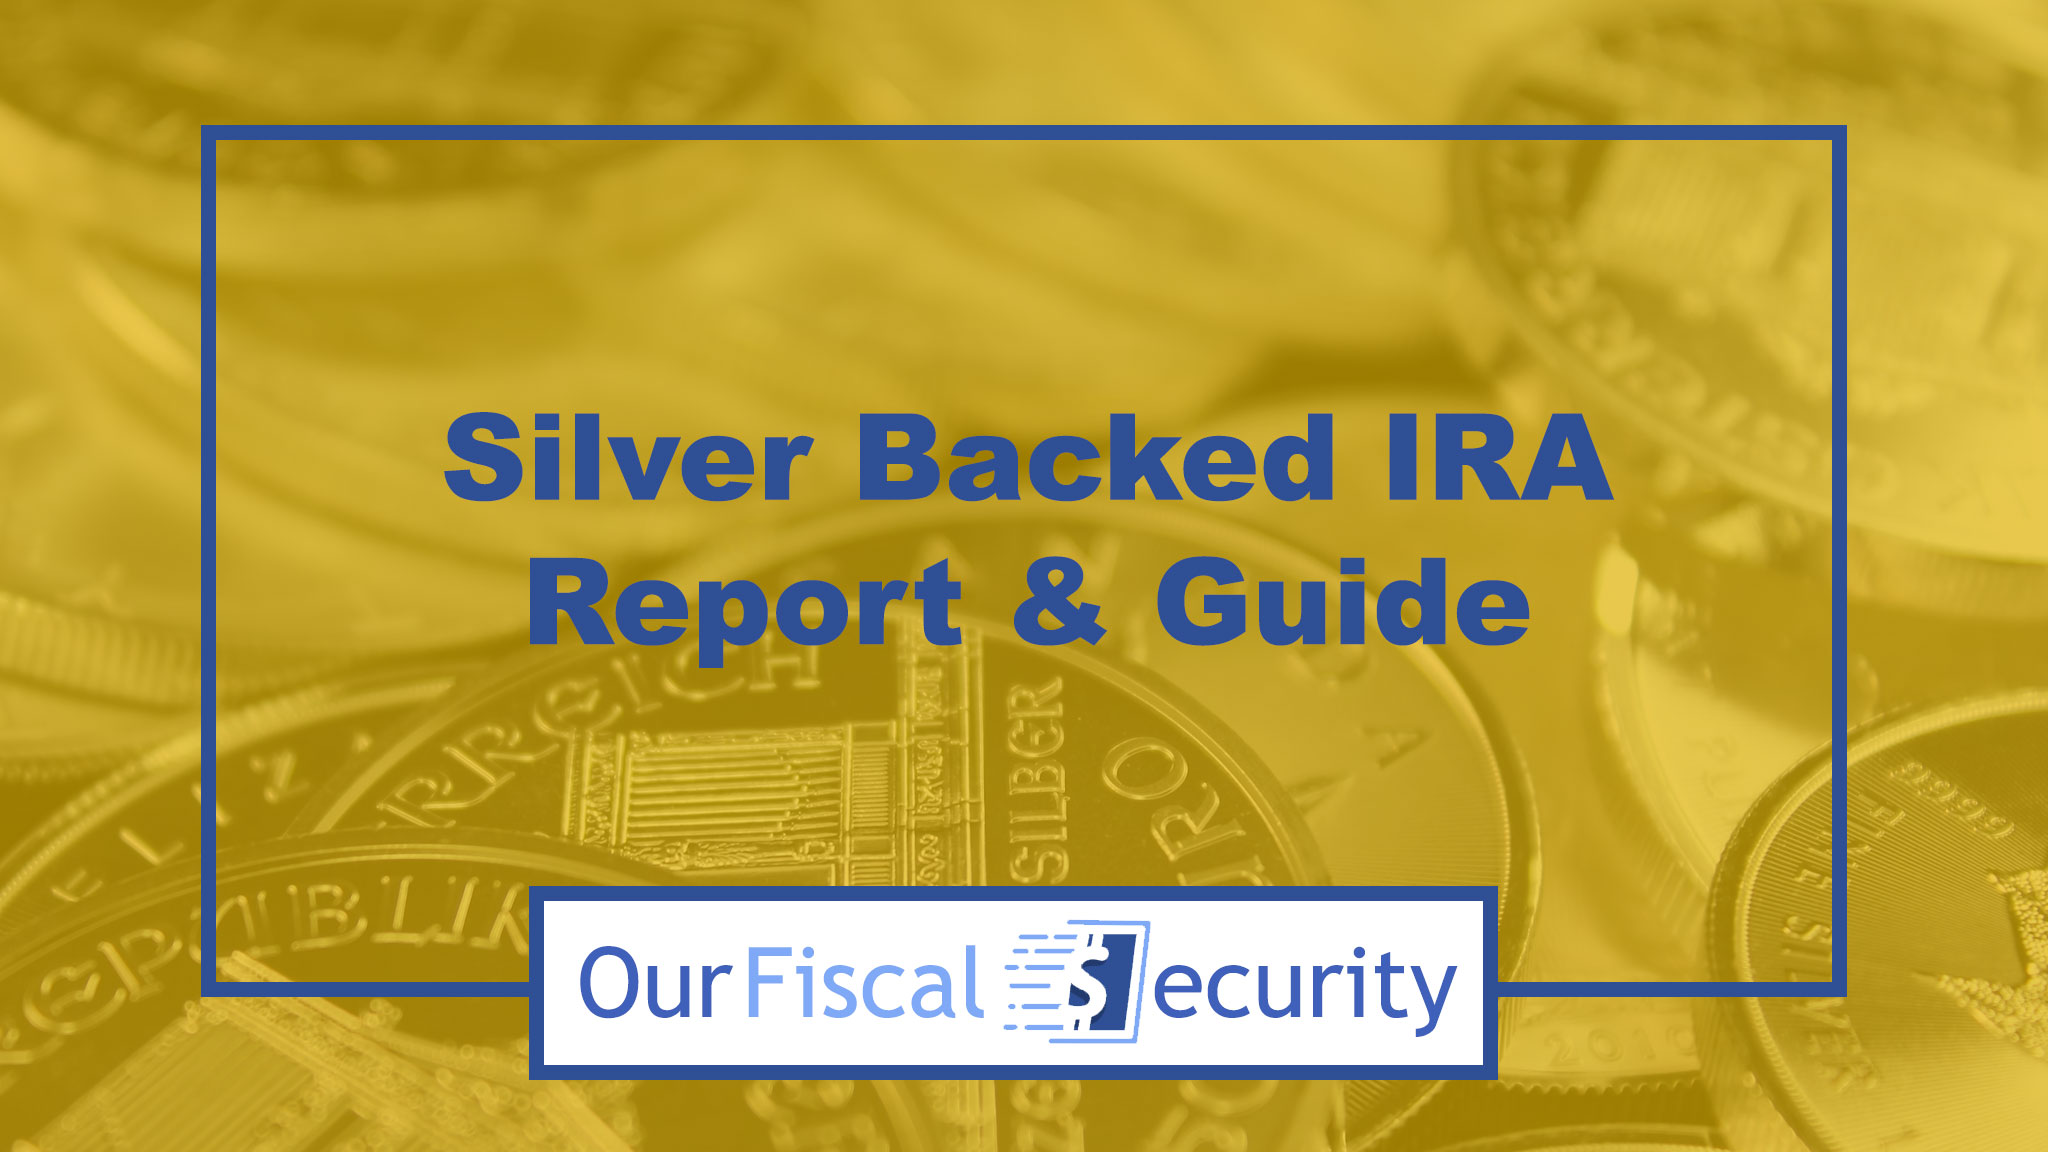 Silver Backed IRA Report